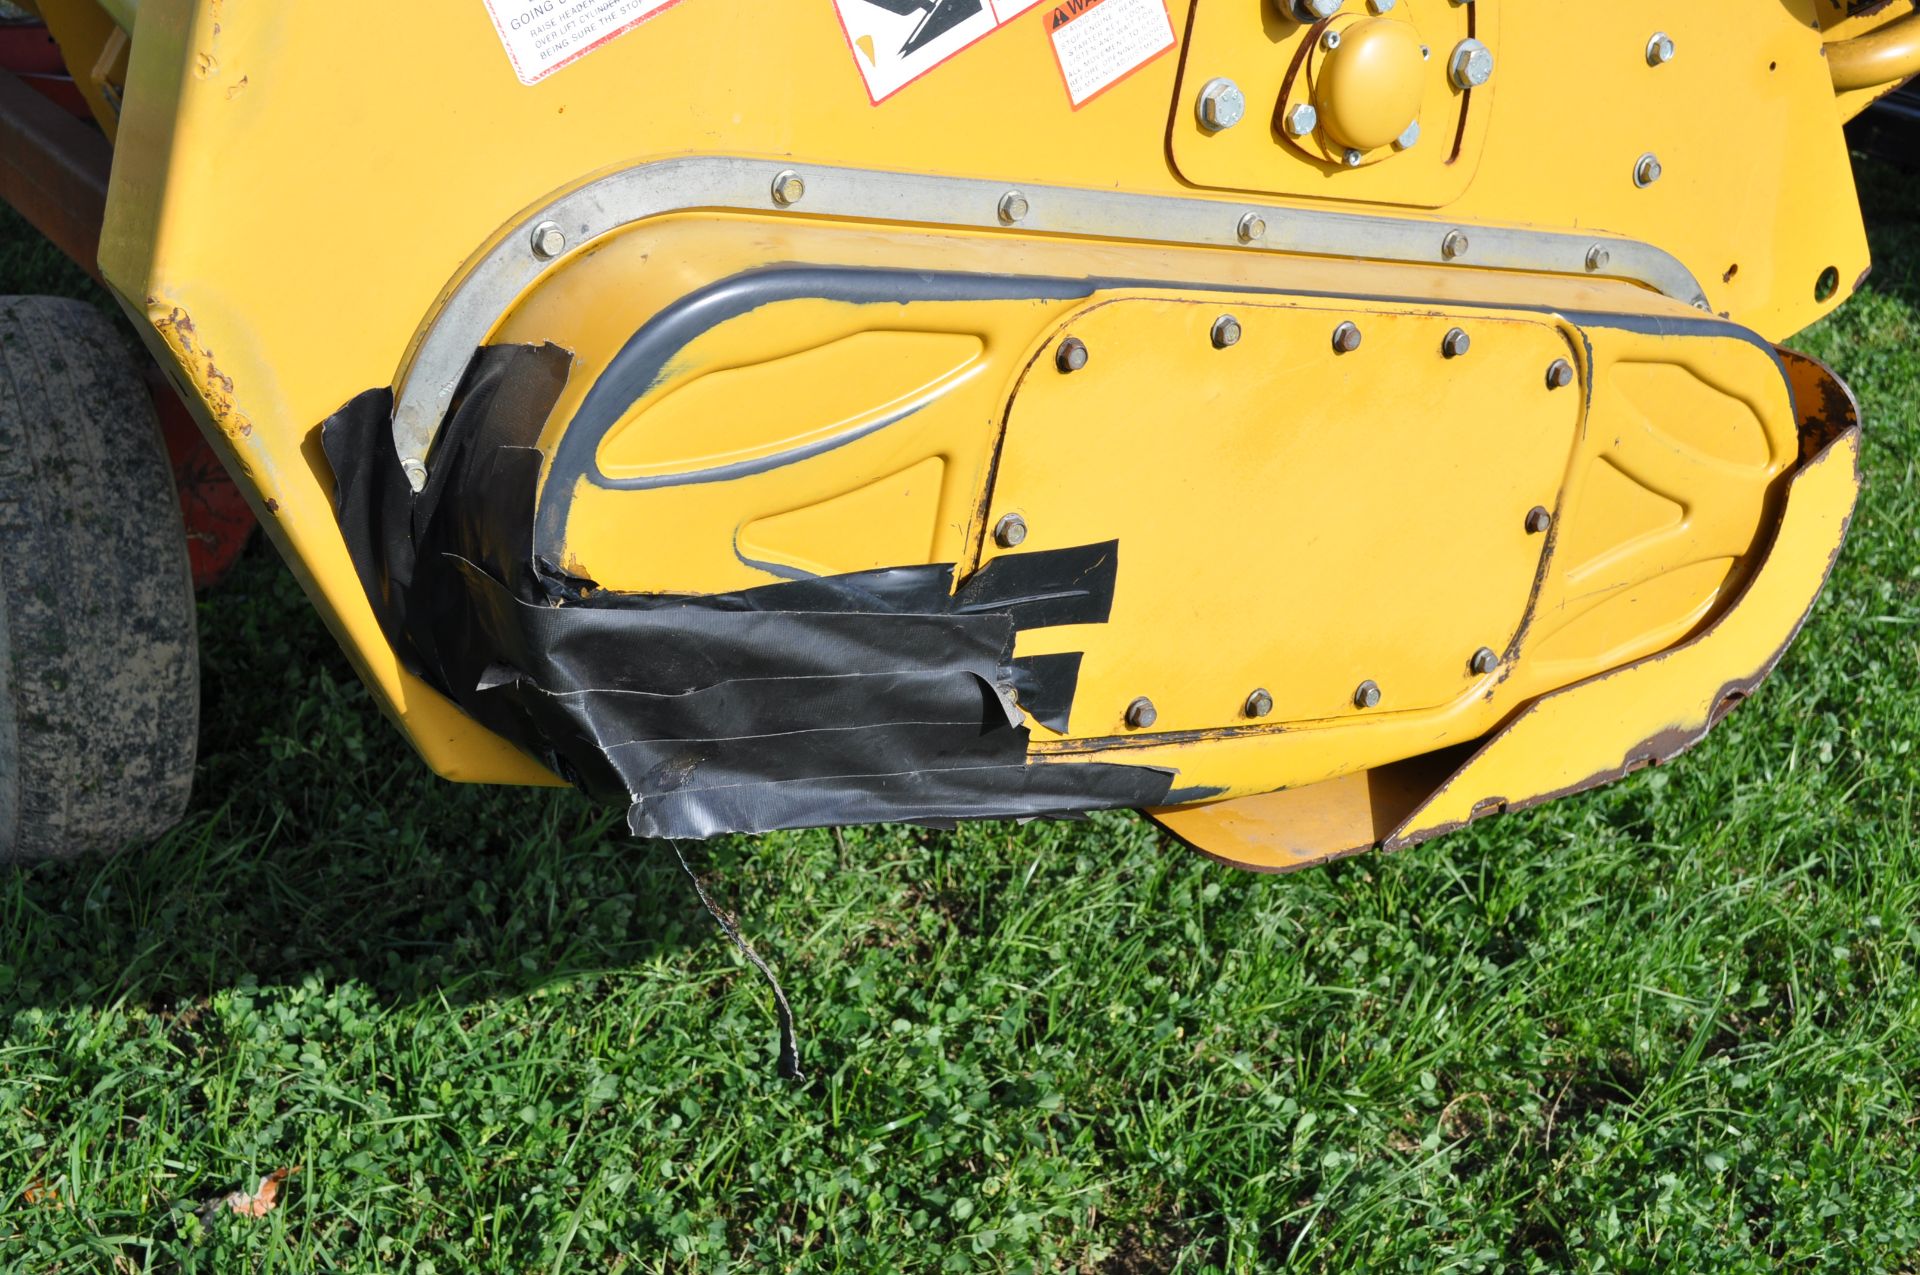 Lexion Model C508 corn head, 30”/8-row, hyd deck plates, poly snouts - Image 15 of 33